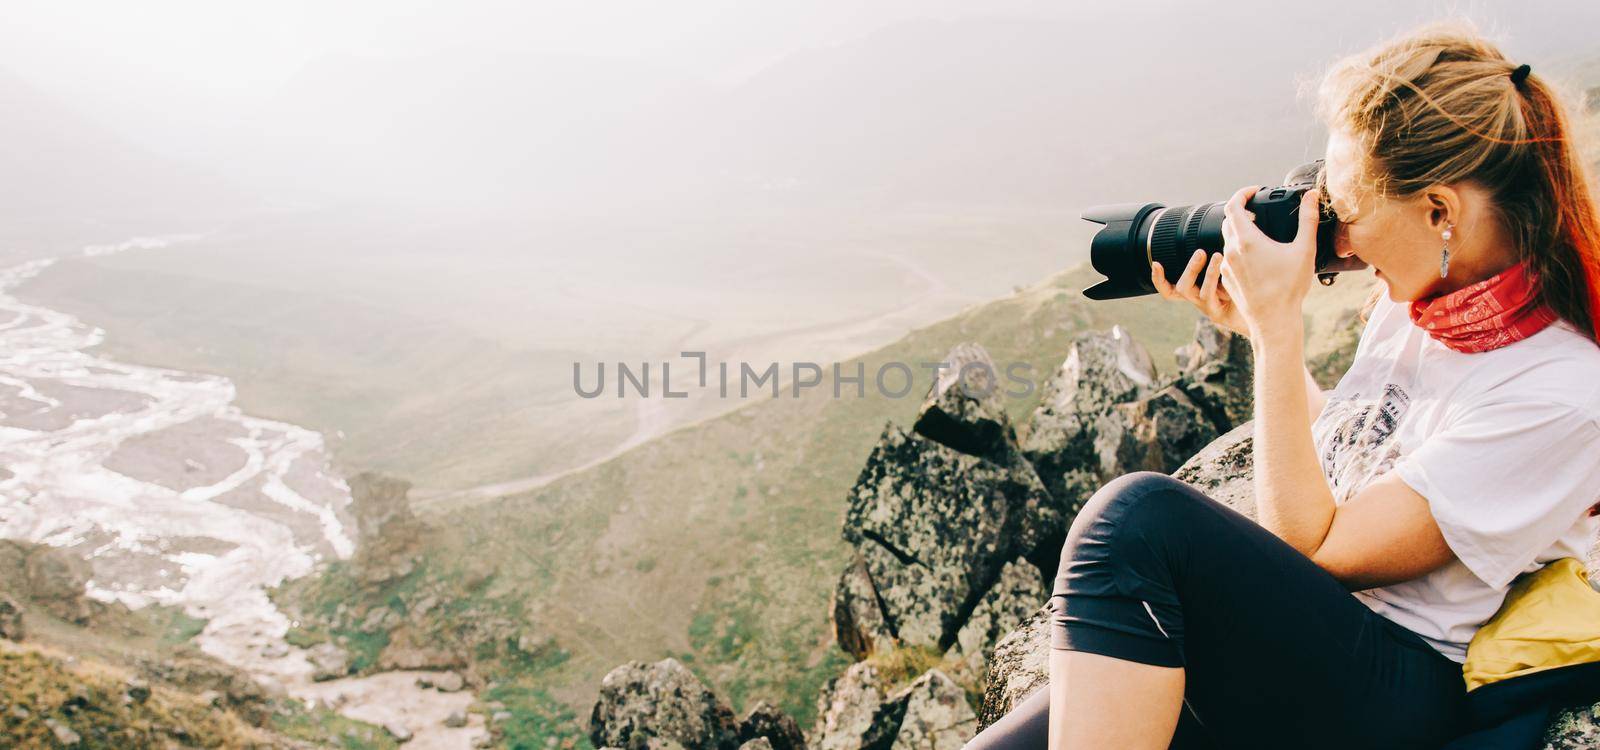 Beautiful traveler young woman photographing in the mountains.